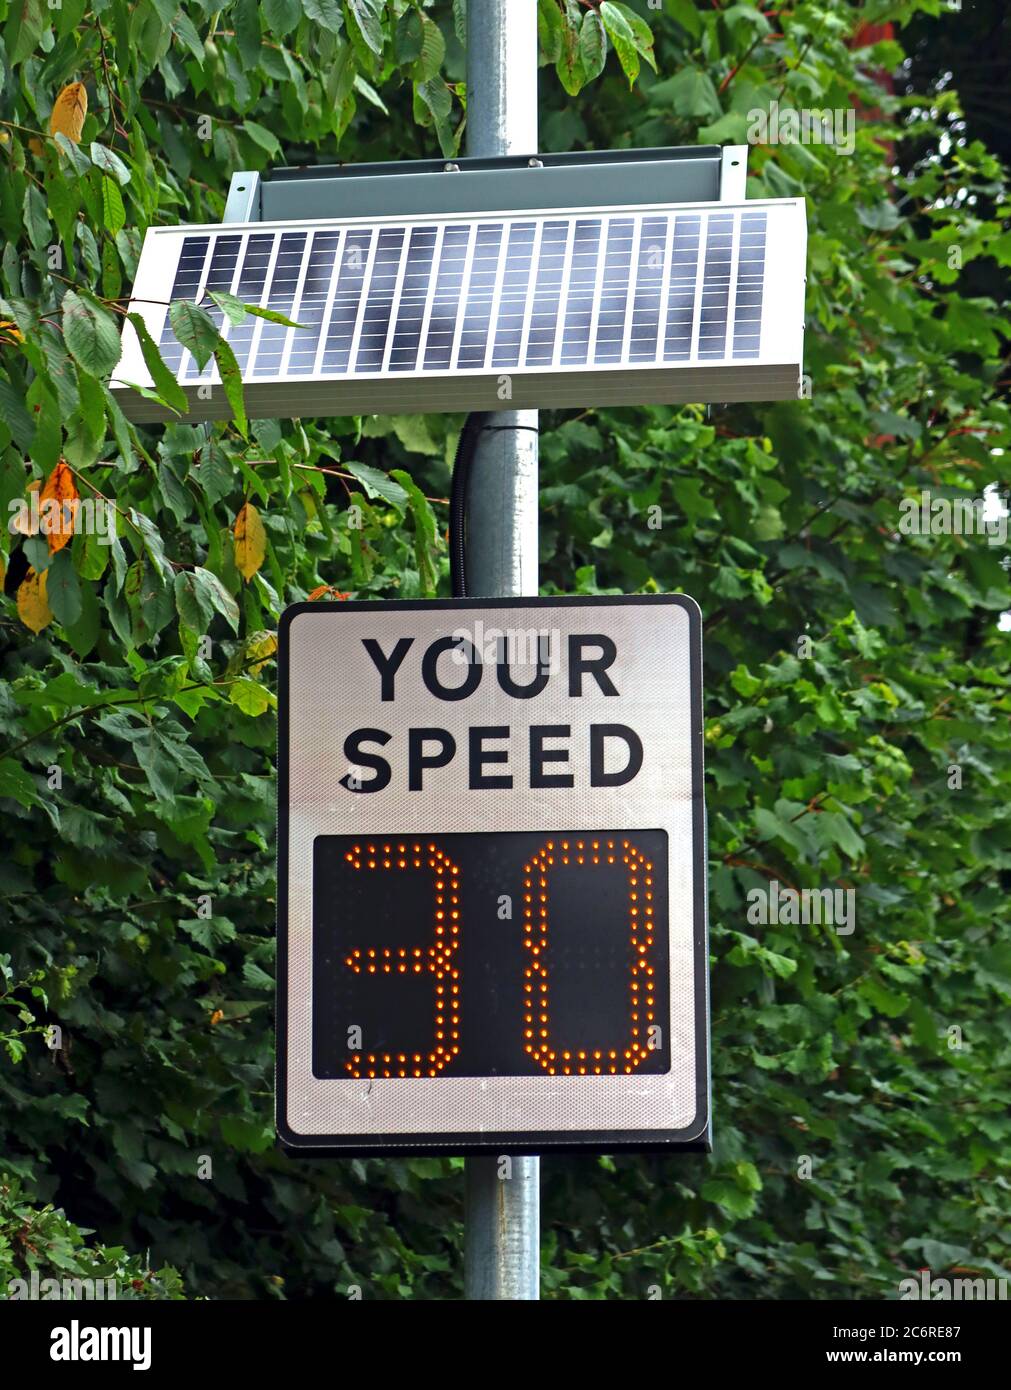 Your Speed,Speed awareness group,radar indicator showing car at 30 mph, Grappenhall , Stockton Heath, Warrington,Cheshire,England Stock Photo